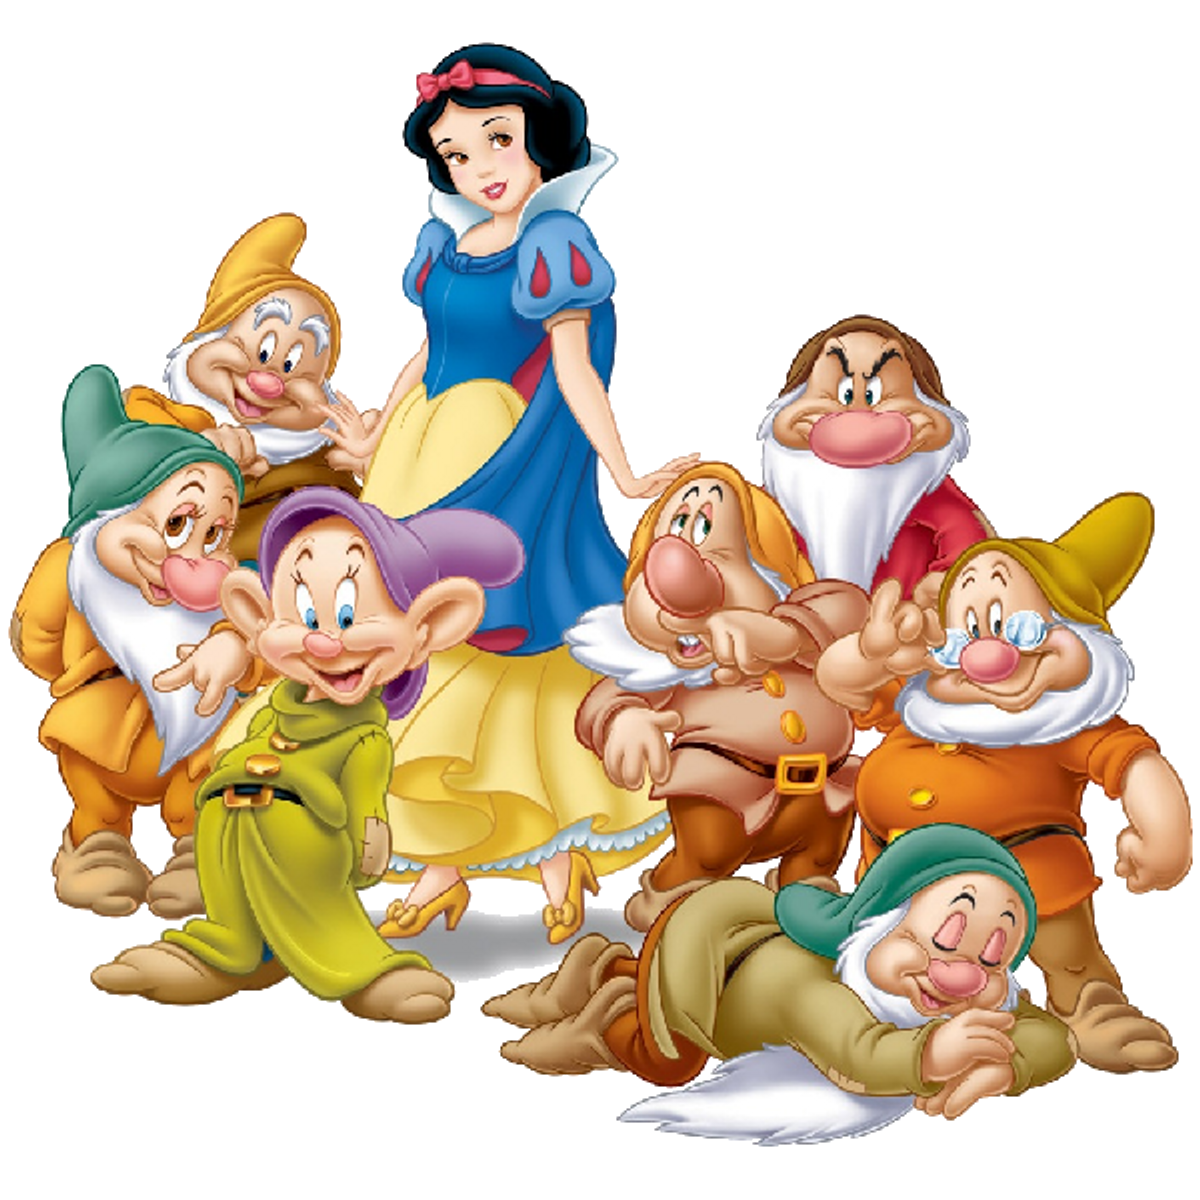 The People You Meet In College As Told By The Seven Dwarfs